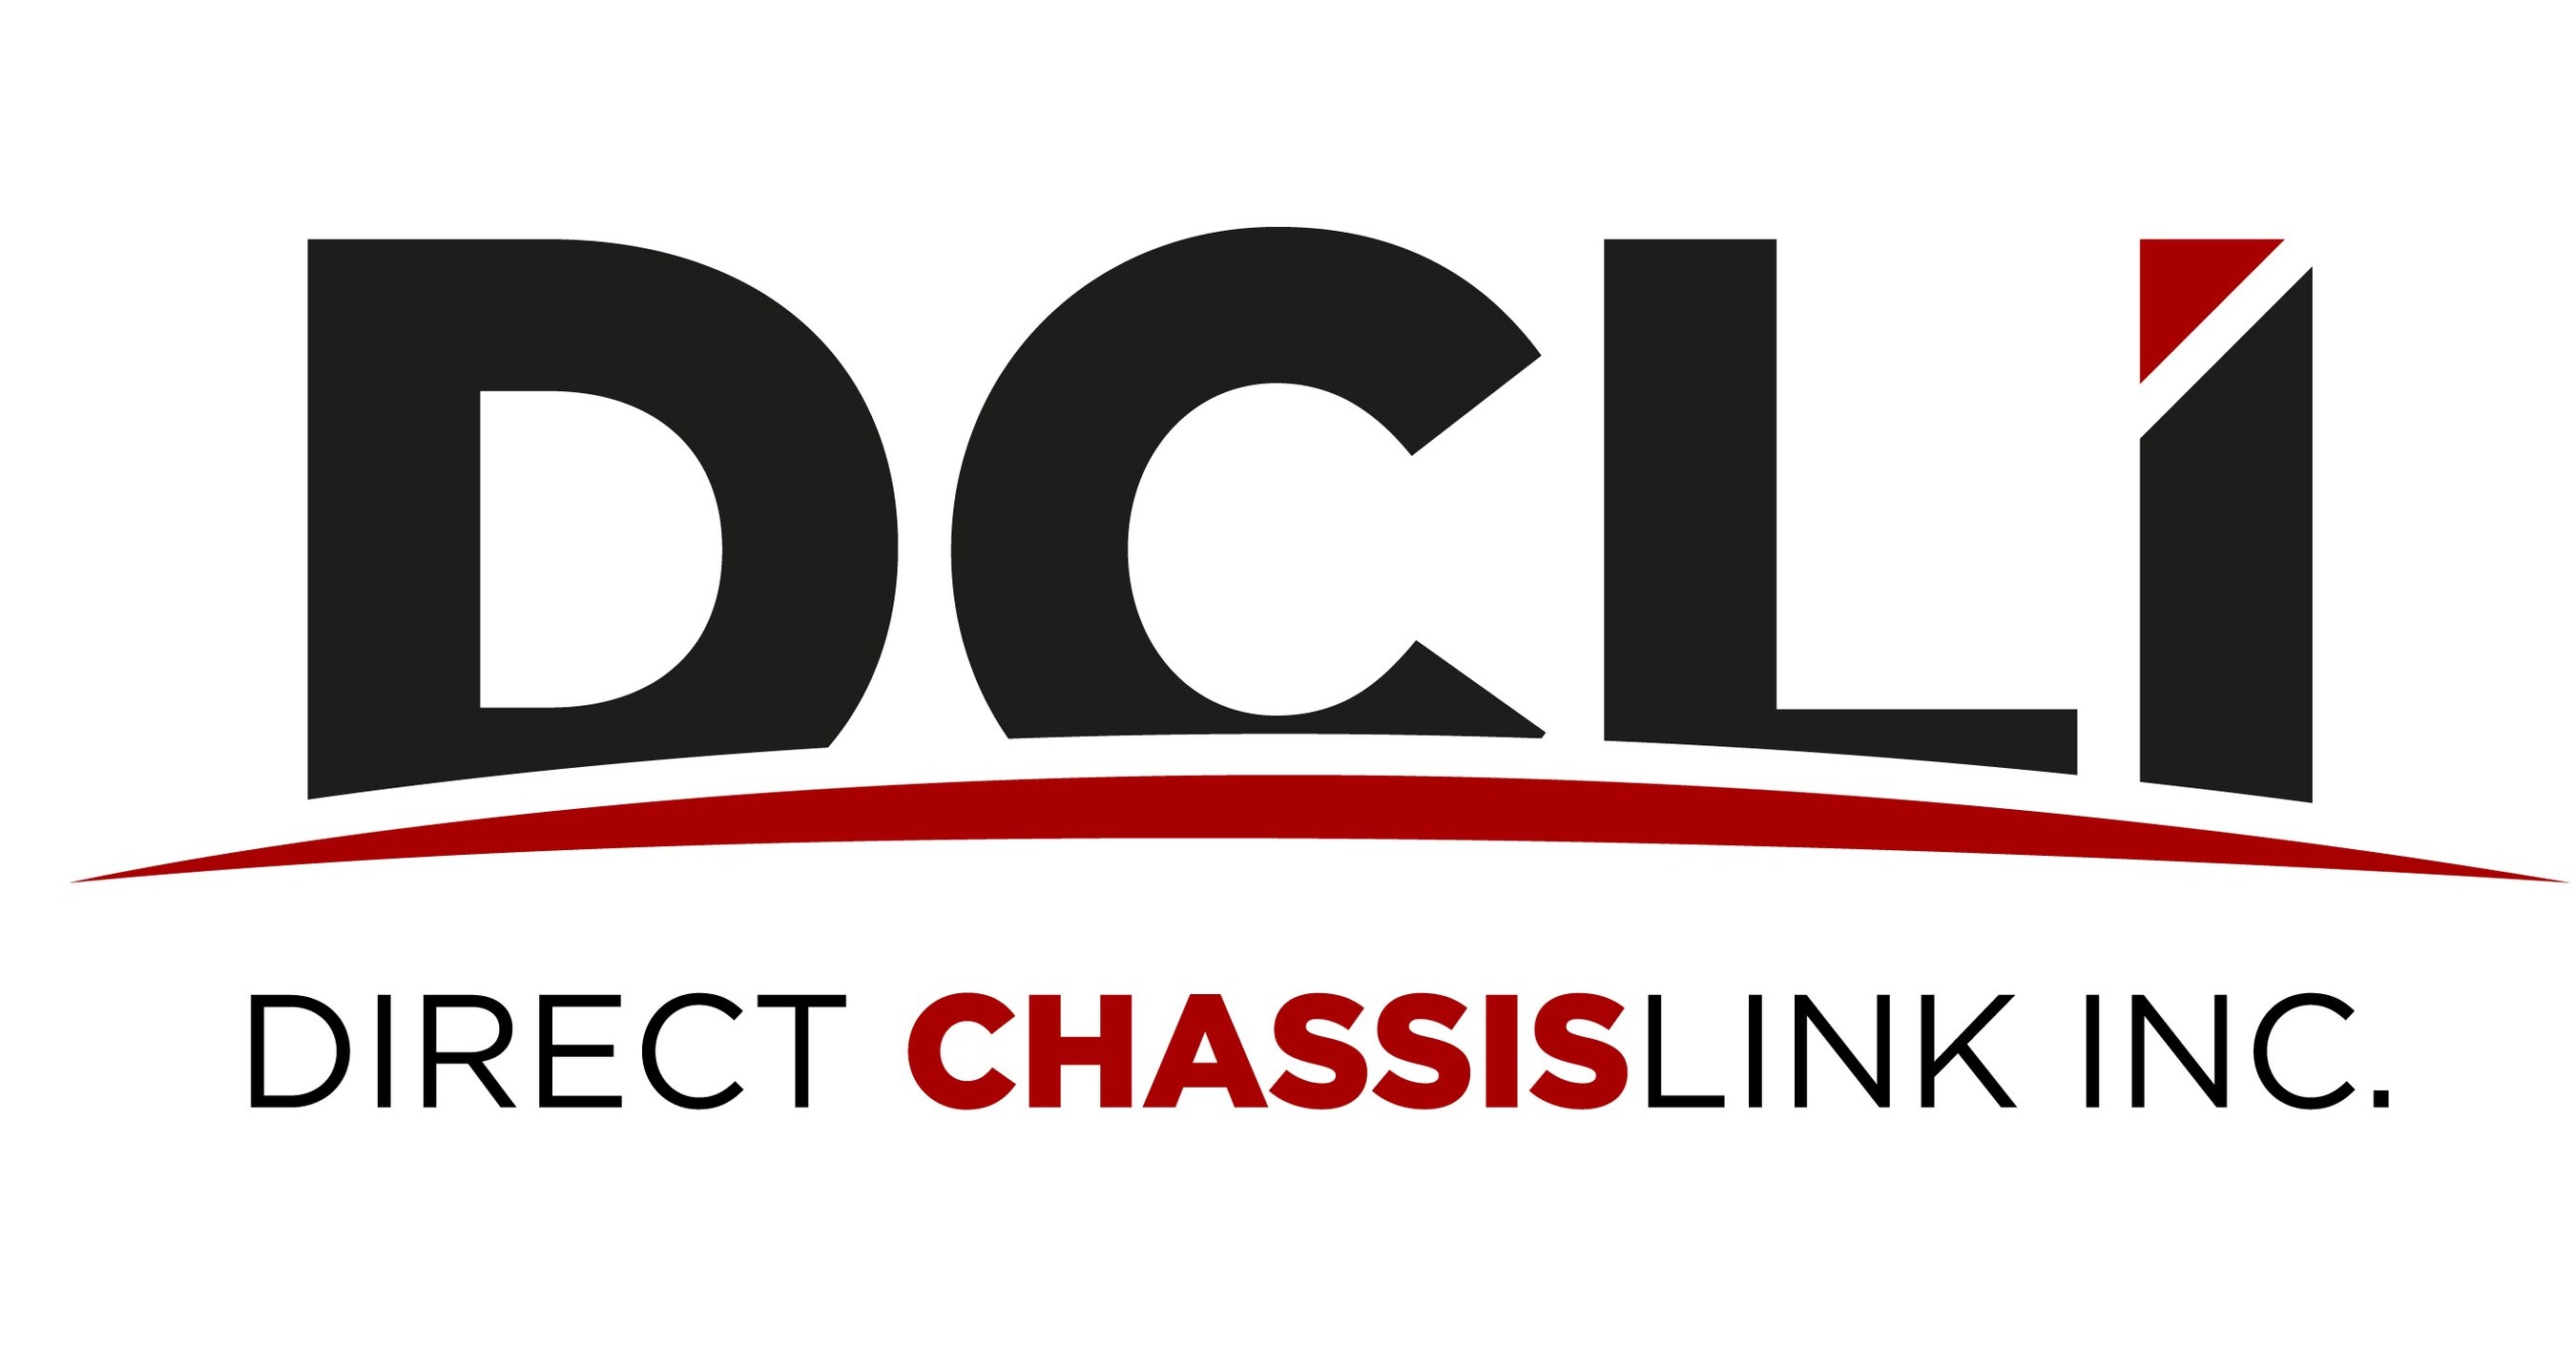 Direct ChassisLink Inc.'s logo